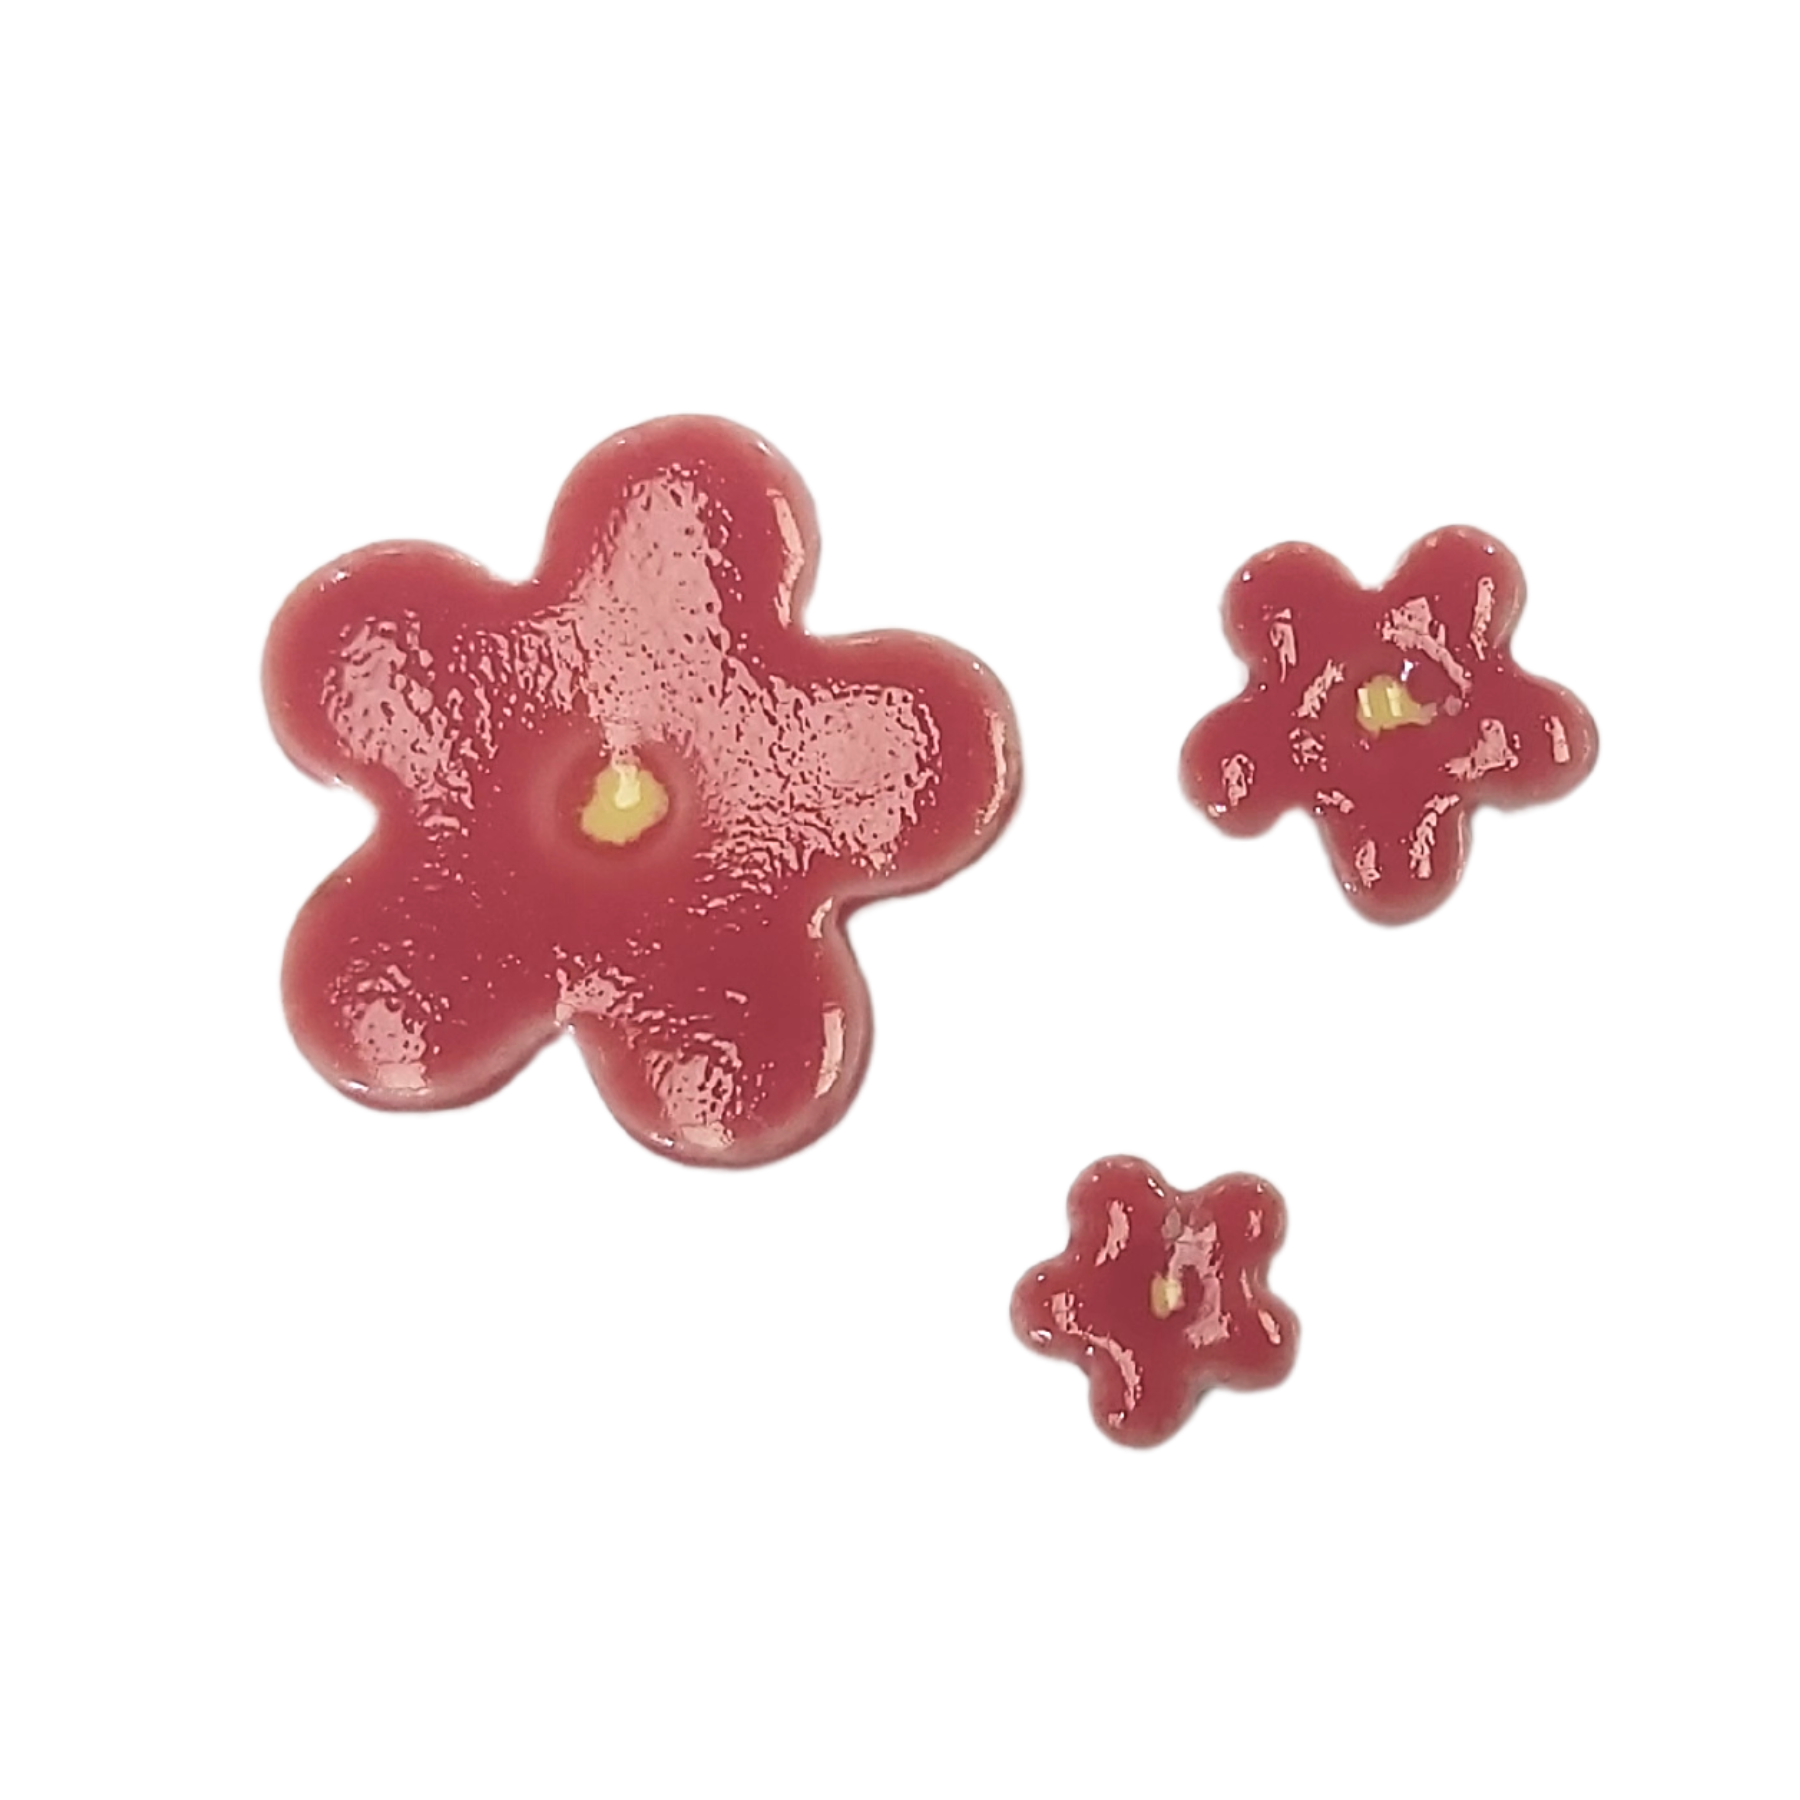 Handmade Shapes - Red Blossoms - Set of 3